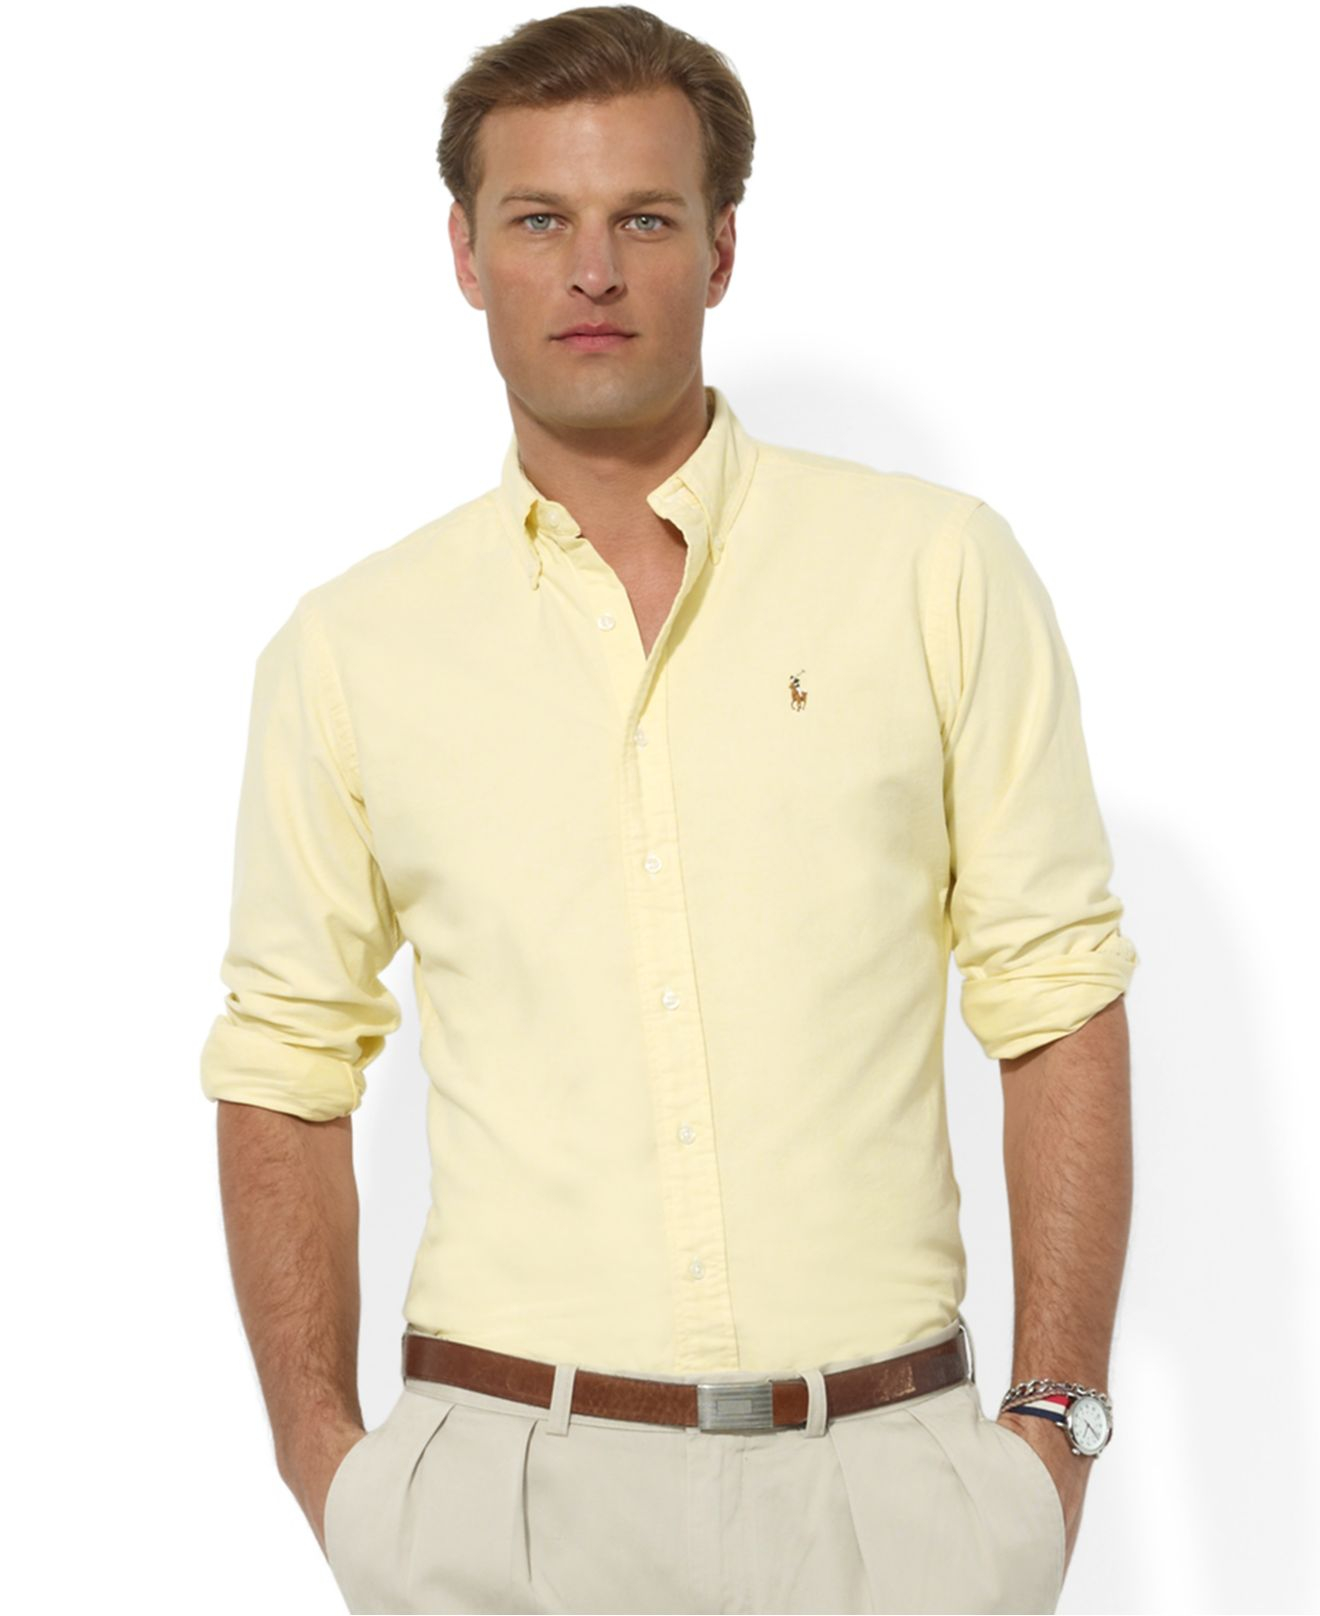 Polo Ralph Lauren Core Classic Fit Oxford Shirt in Yellow for Men - Lyst